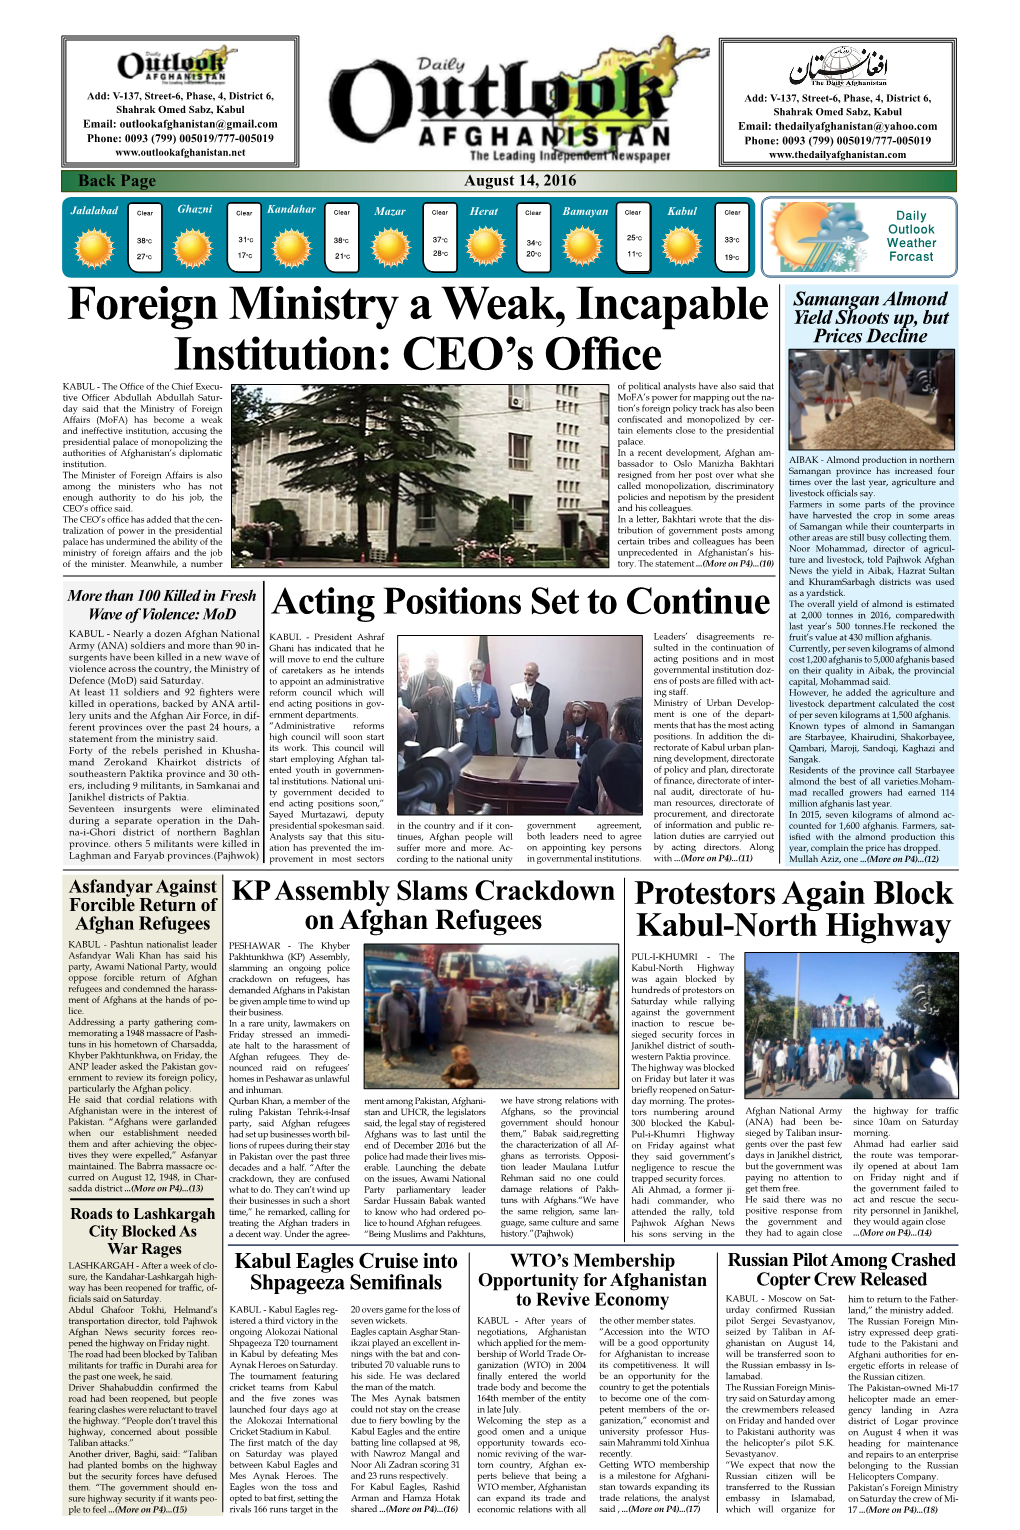 Foreign Ministry a Weak, Incapable Institution